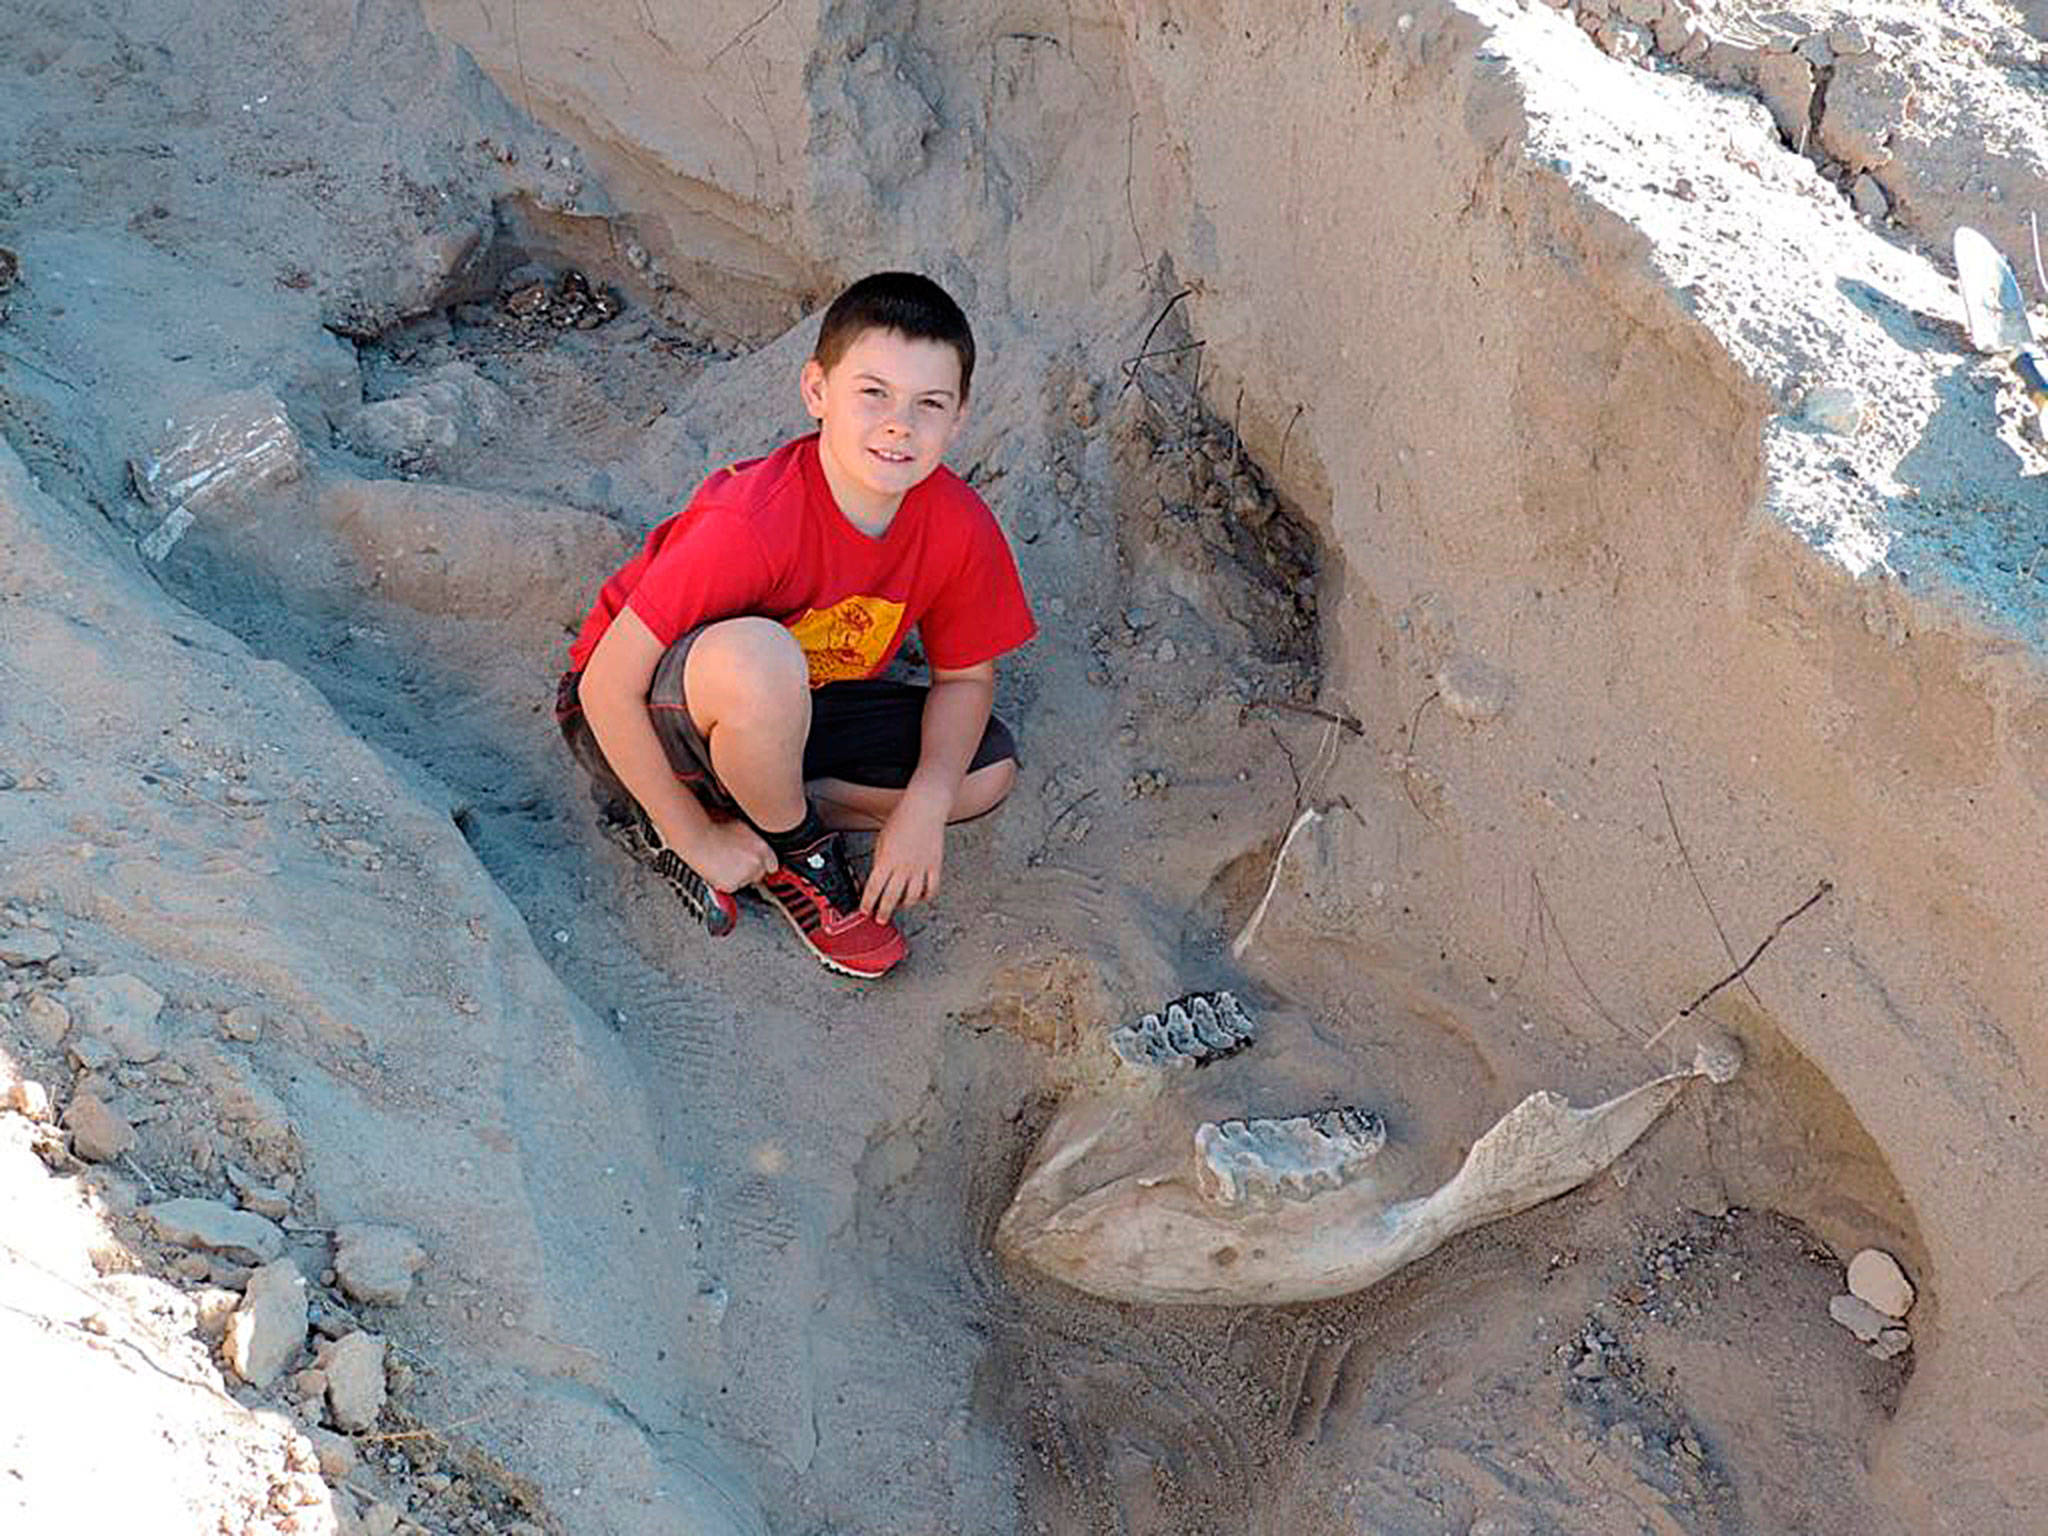 Jude Sparks with the Stegomastodon fossil he stumbled across near Las Cruces, New Mexico. (Peter Houde/New Mexico State University)